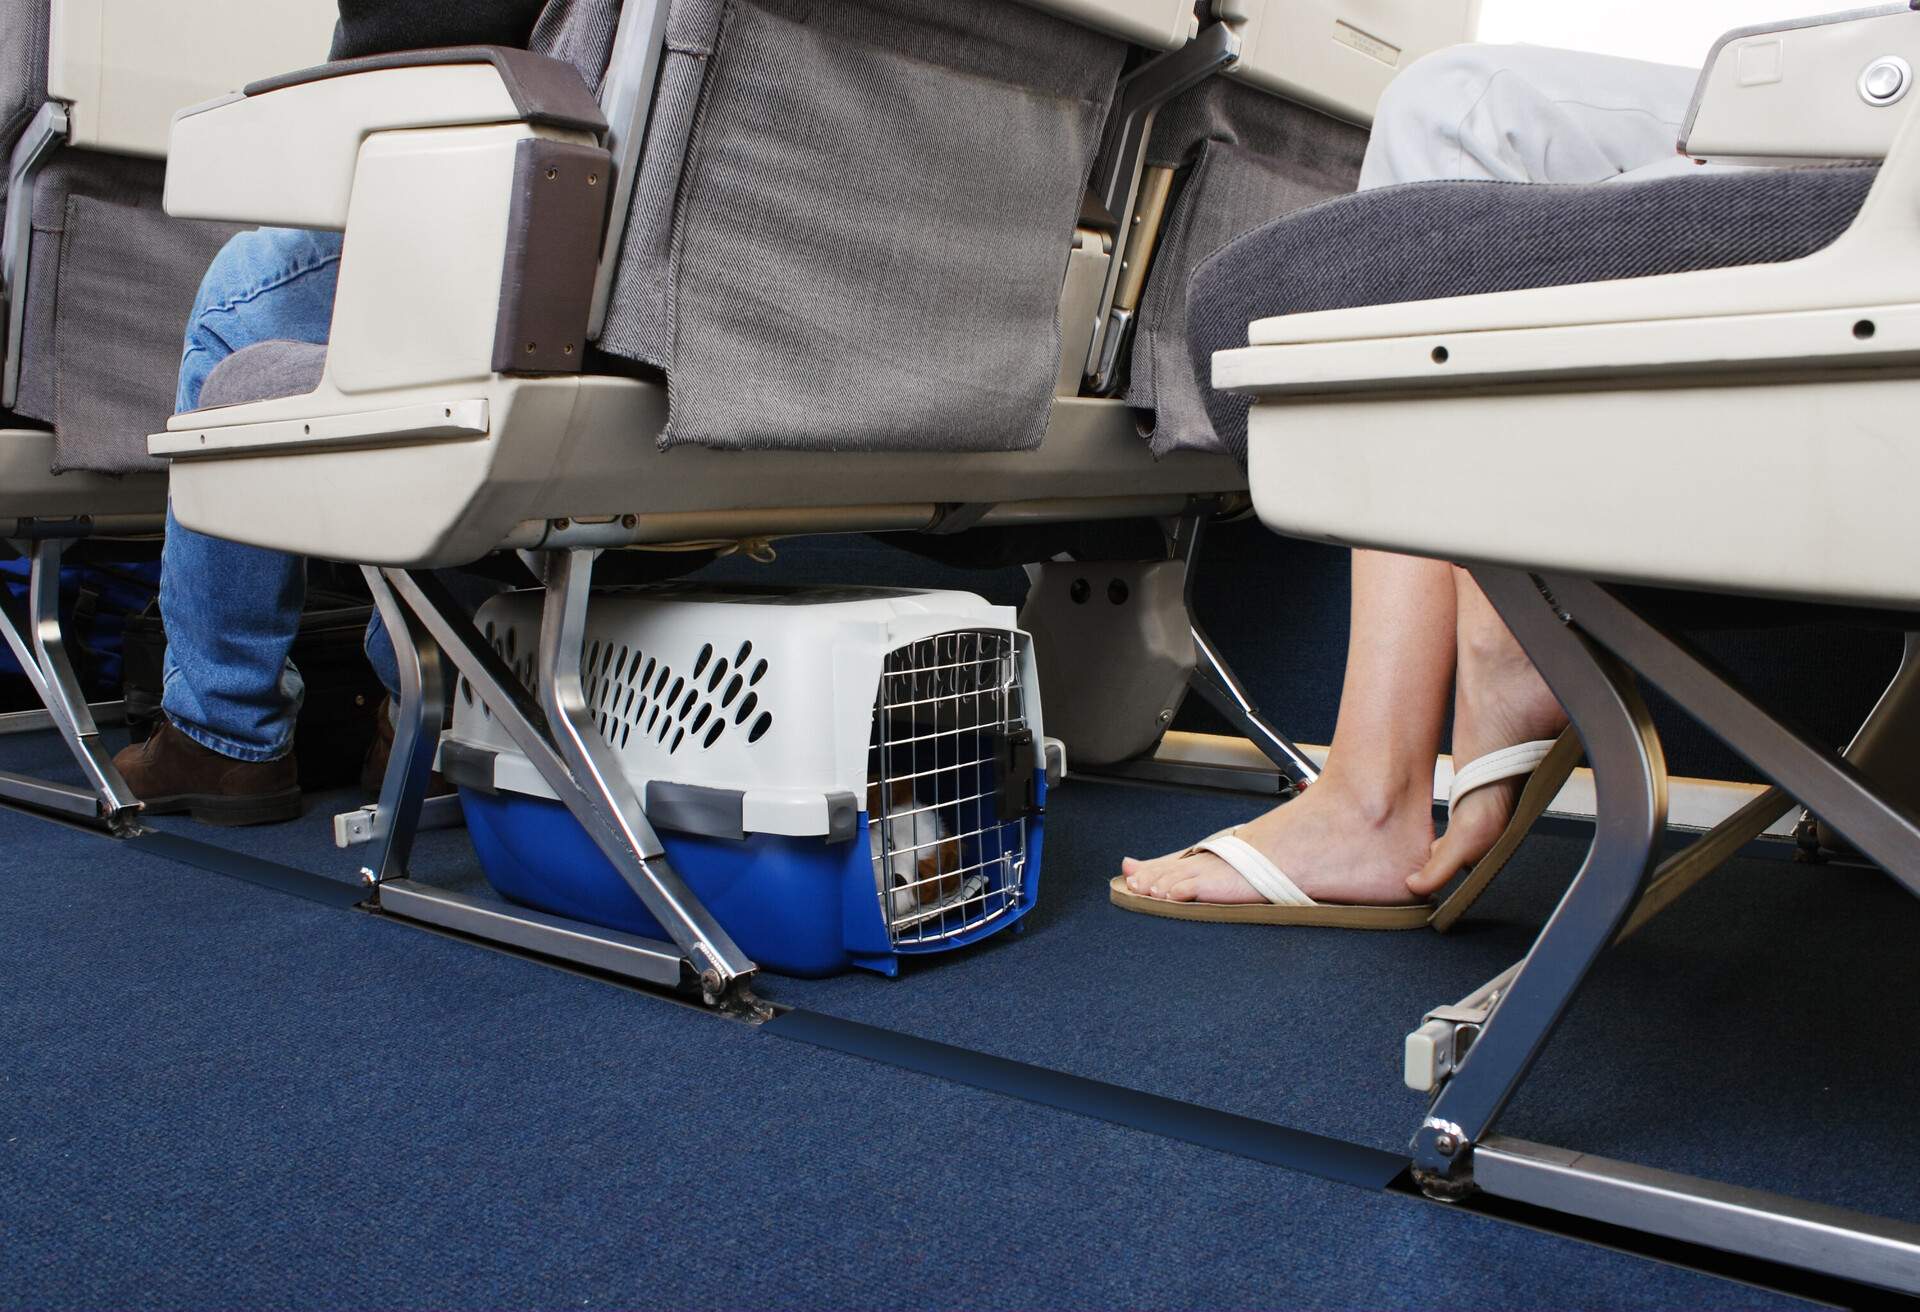 A dog inside a cage stowed under an airplane's seat.